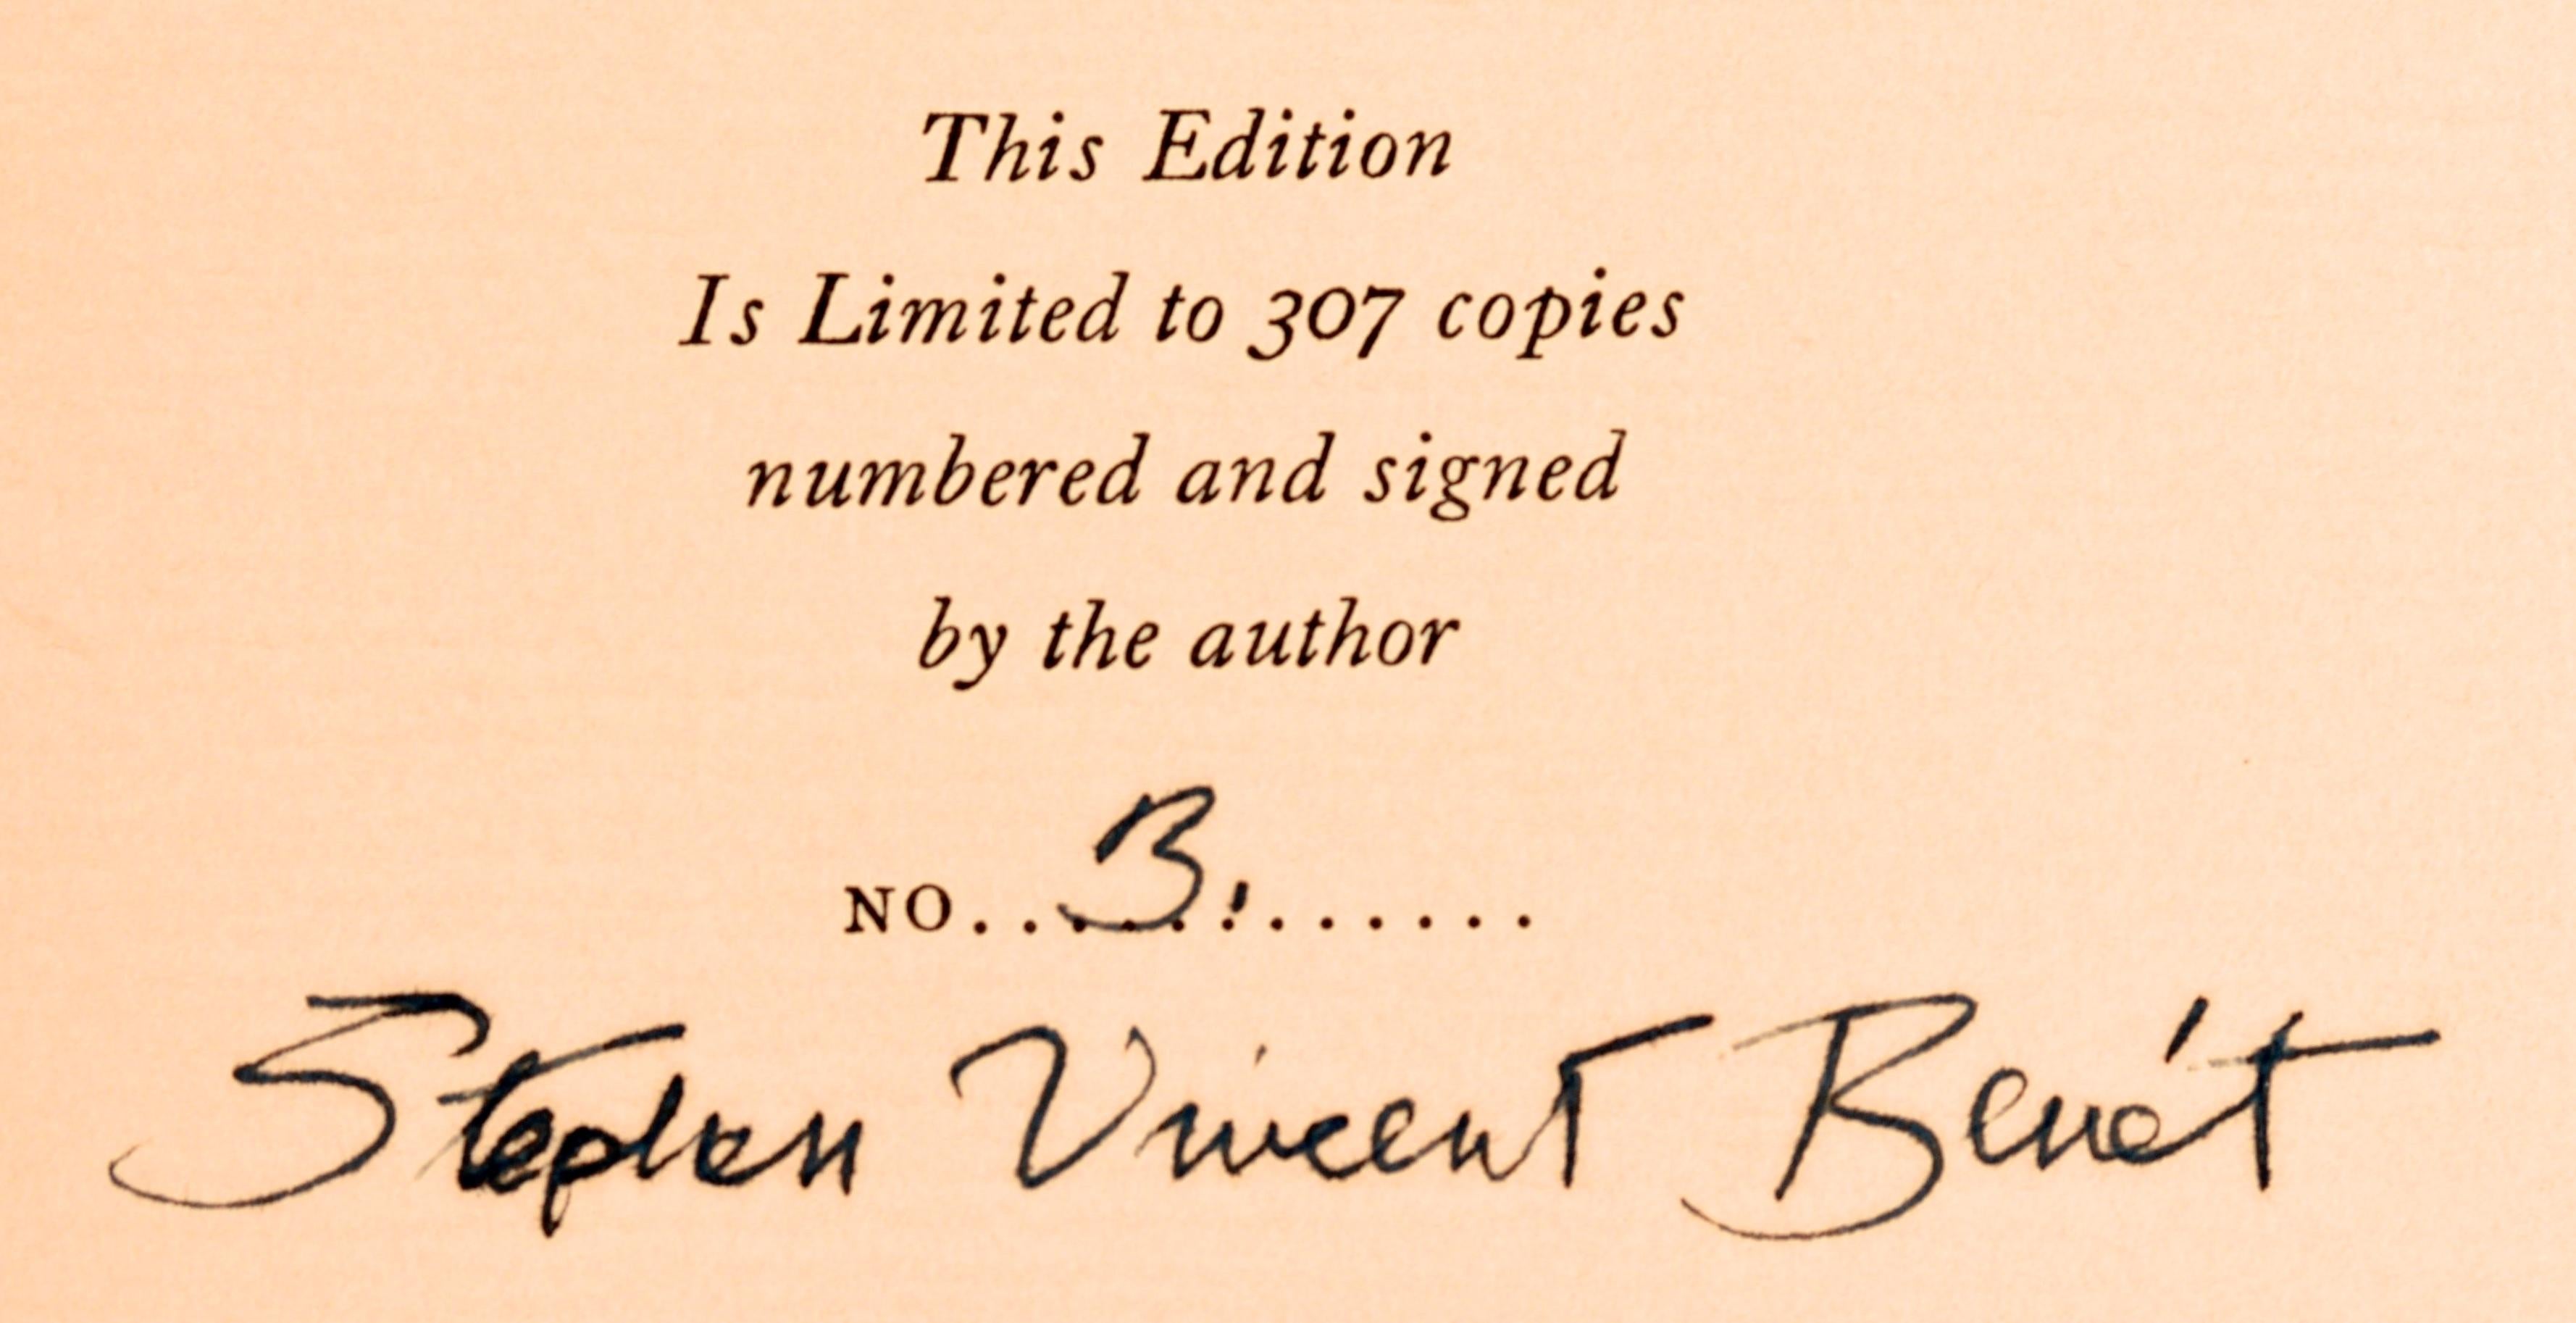 James Shore's Daughter by Stephen Vincent Benét. Publisher: Doubleday, Doran & Company, Inc, Garden City, New York 1934. Stated 1st numbered Ed (#3/307) Signed by the author with slipcase. This was Nelson Doubledays personal copy. He was given a